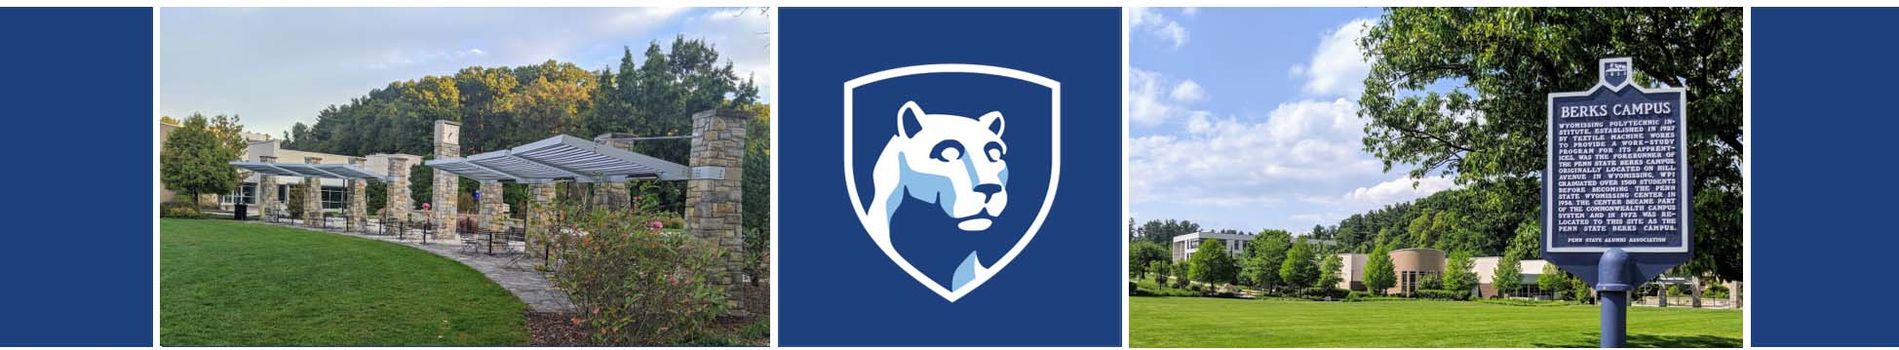 Collage of photos of the campus with the Penn State Shield